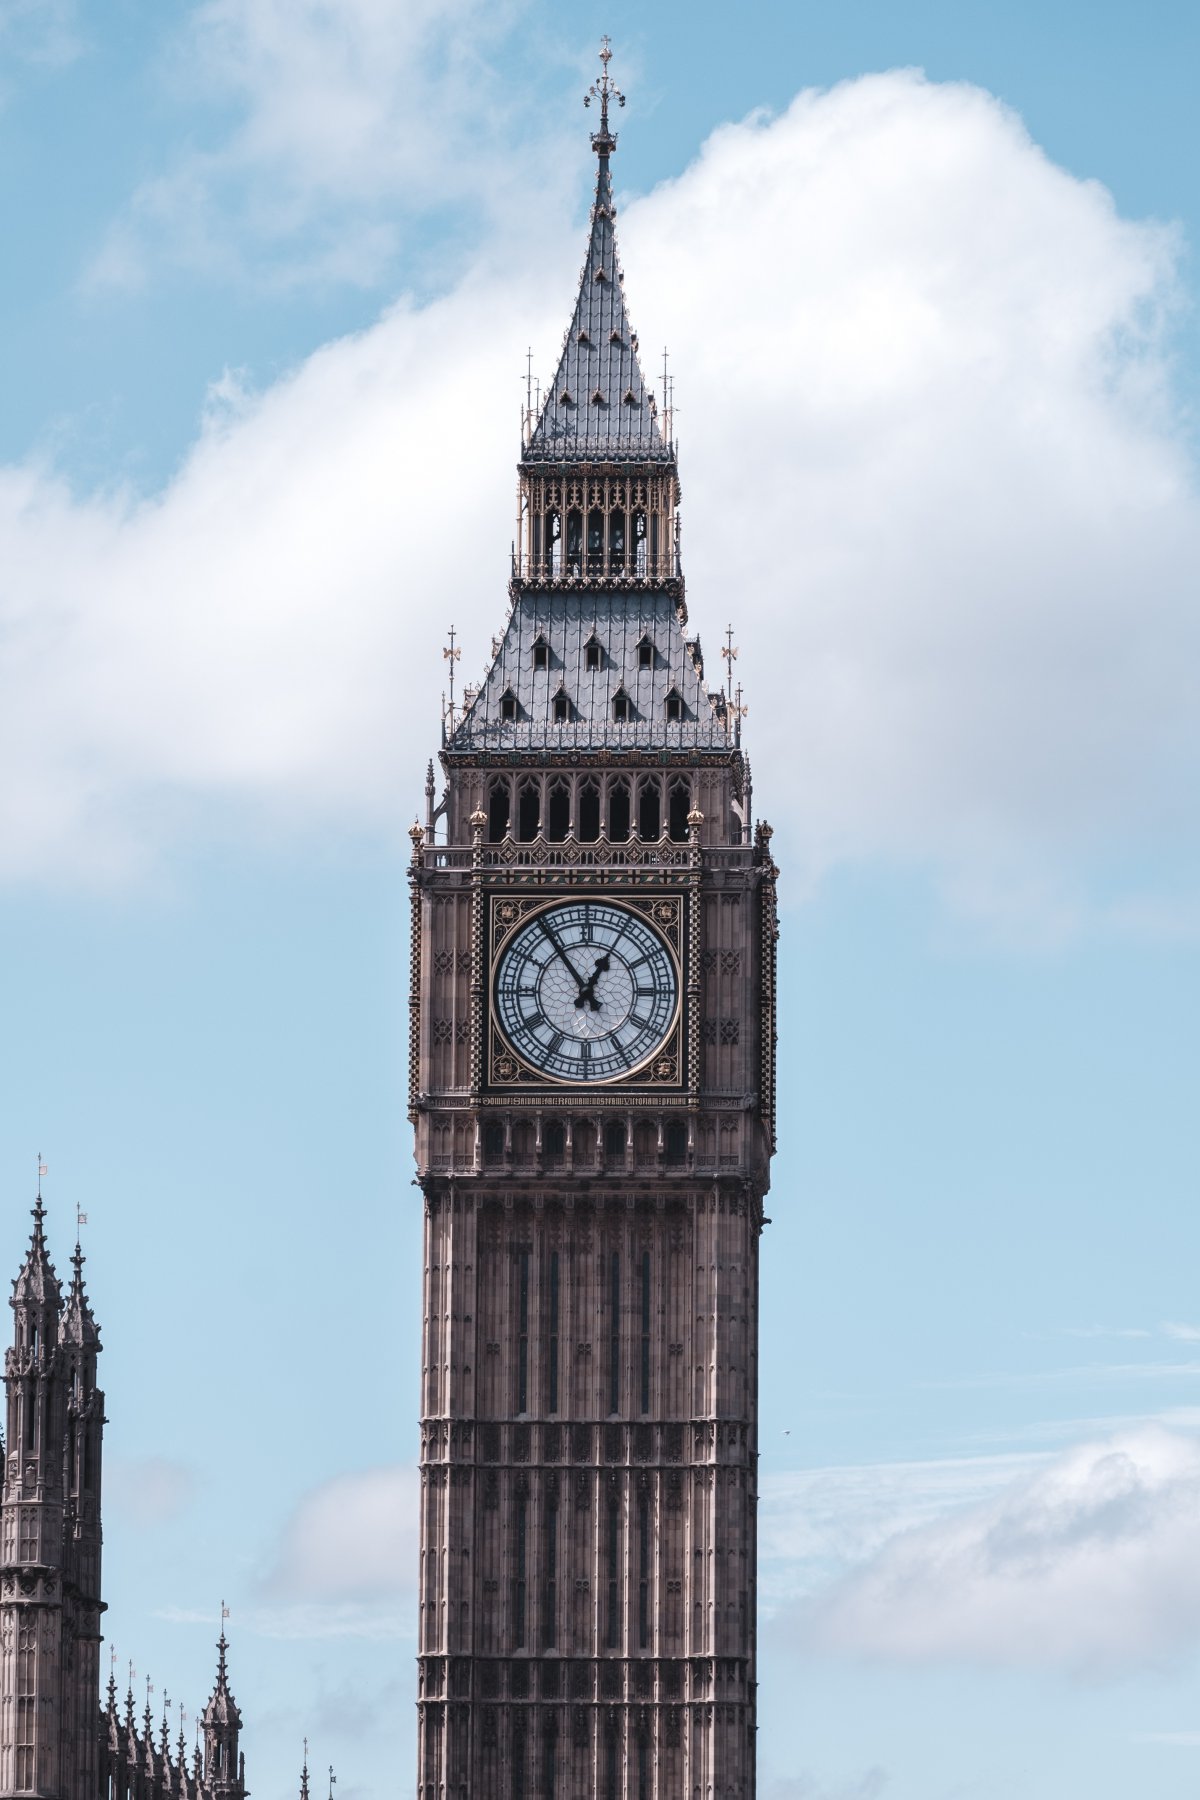 Pictures of the British Big Ben from different angles